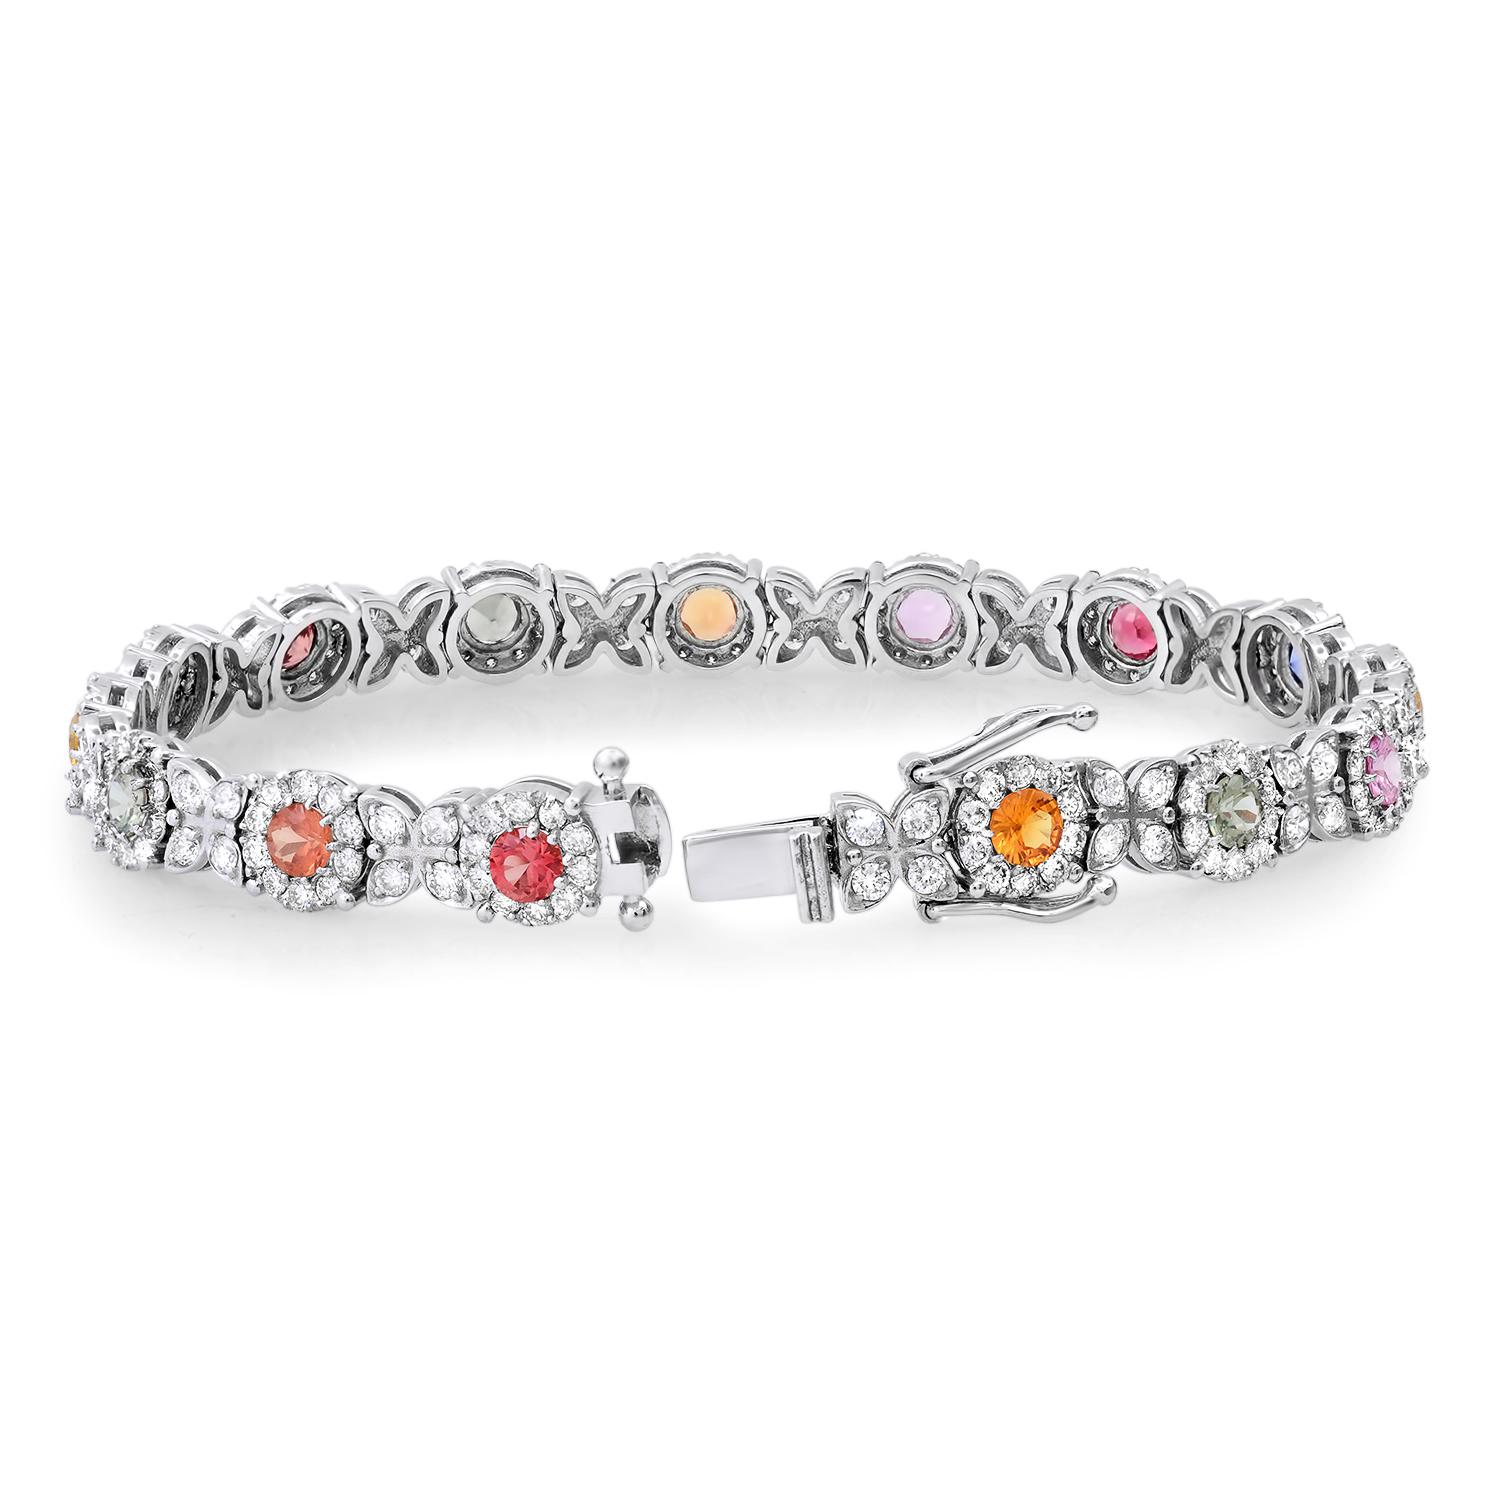 14K White Gold Setting with 3.02ct Sapphire and 3.37ct Diamond Bracelet